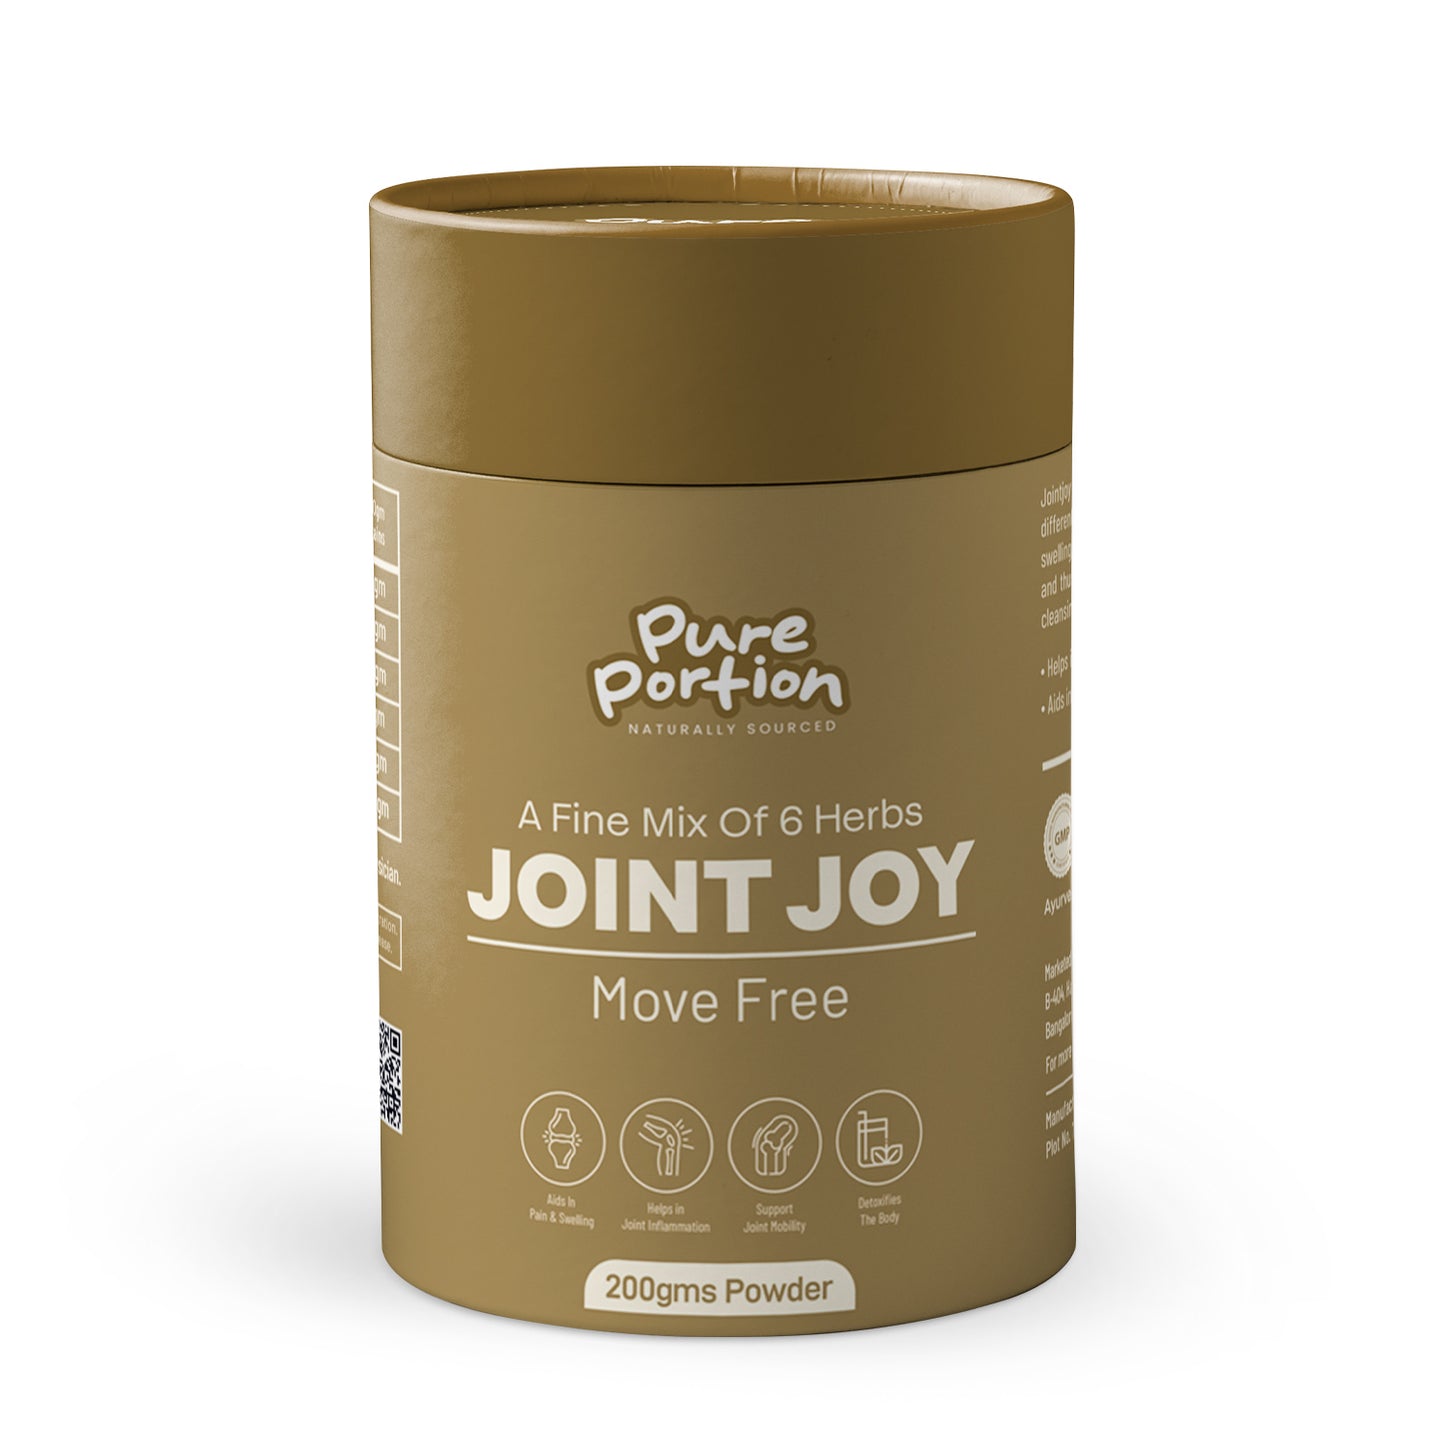 JointJoy - Move Free, Joint Pain care, Arthritis Relief, Joint Health and Relief